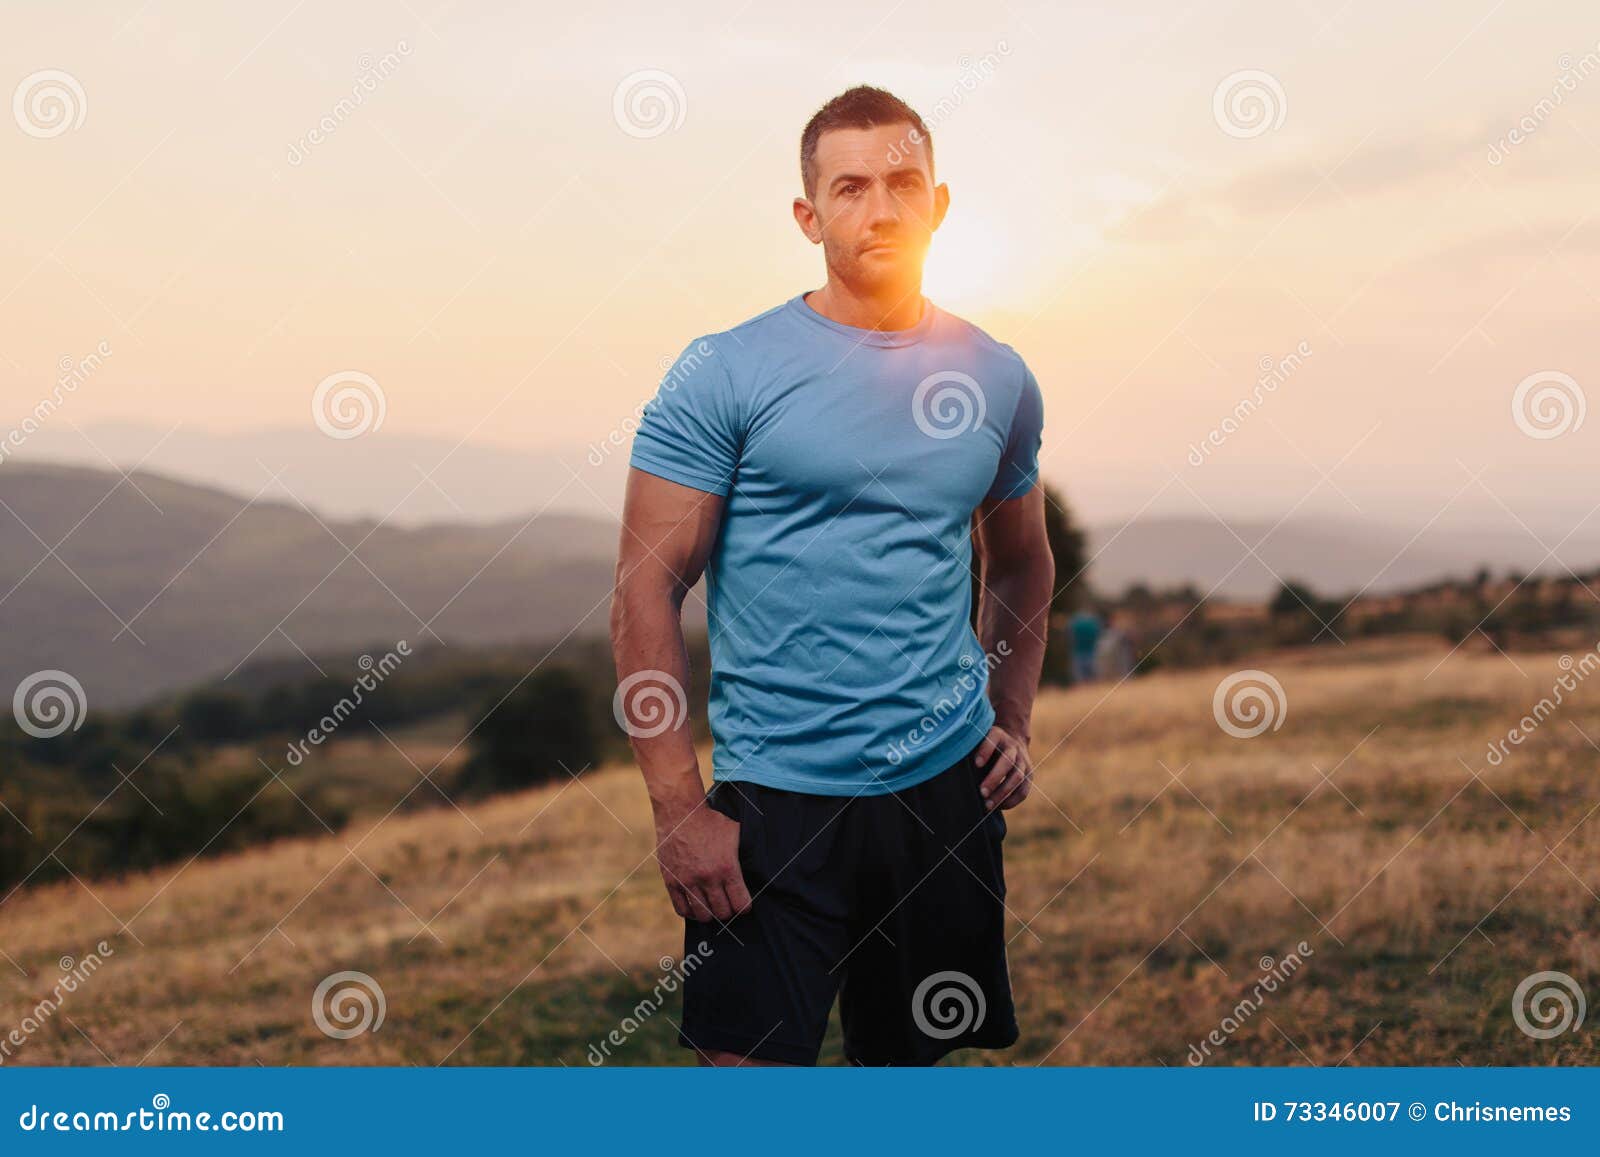 The road is waiting stock image. Image of solo, clothing - 73346007